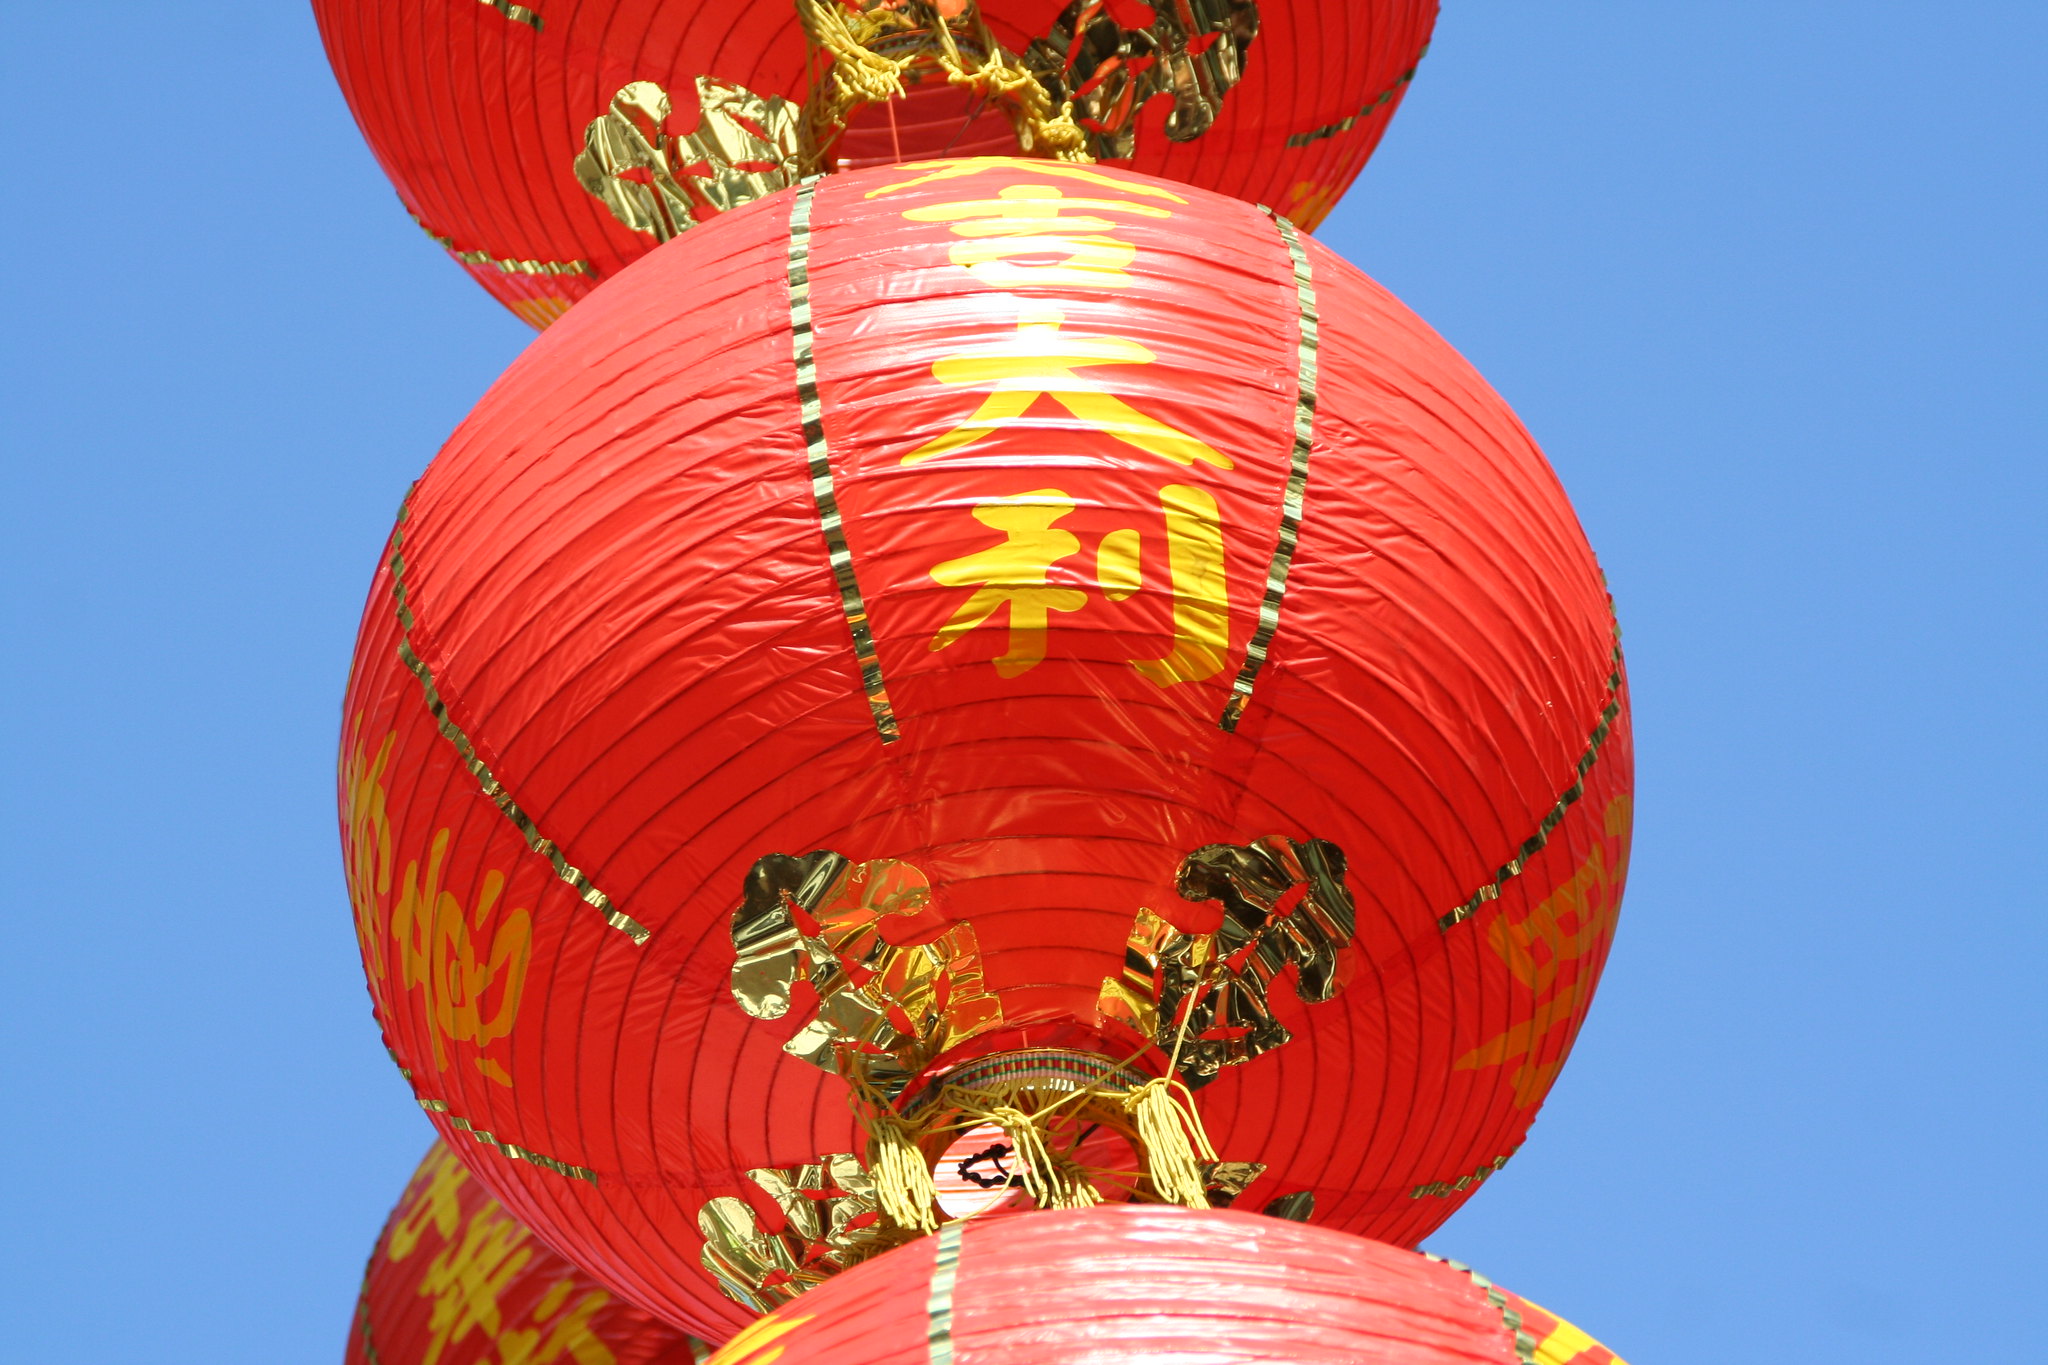 Red paper lanterns decorated with special messages for Lunar New Year in China 